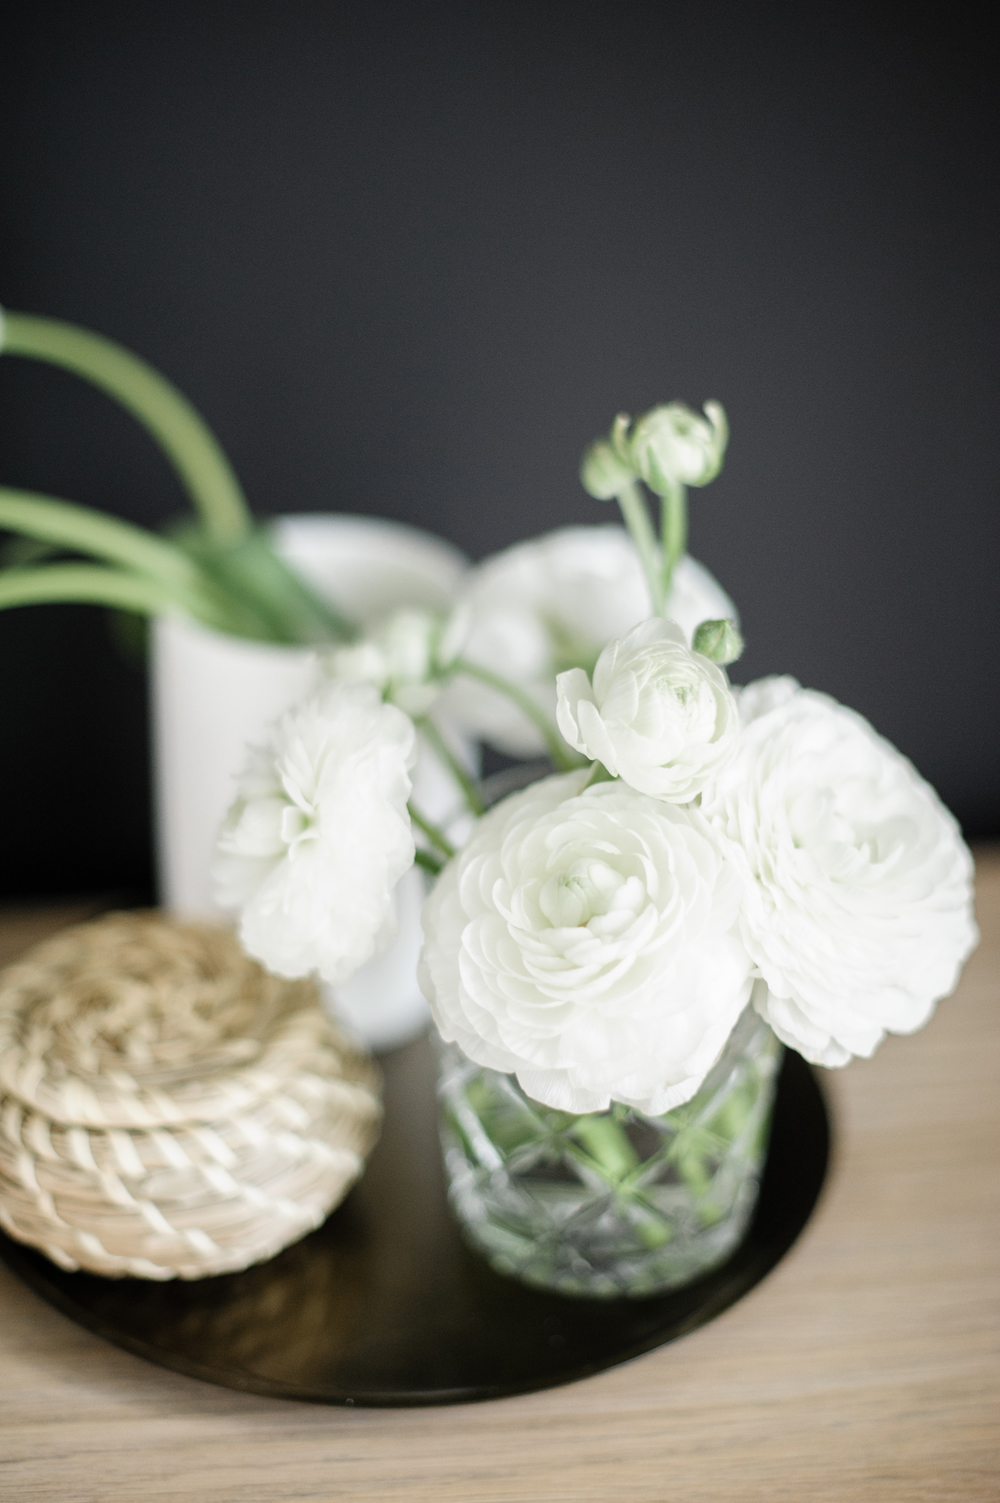 White flowers on a bedside table